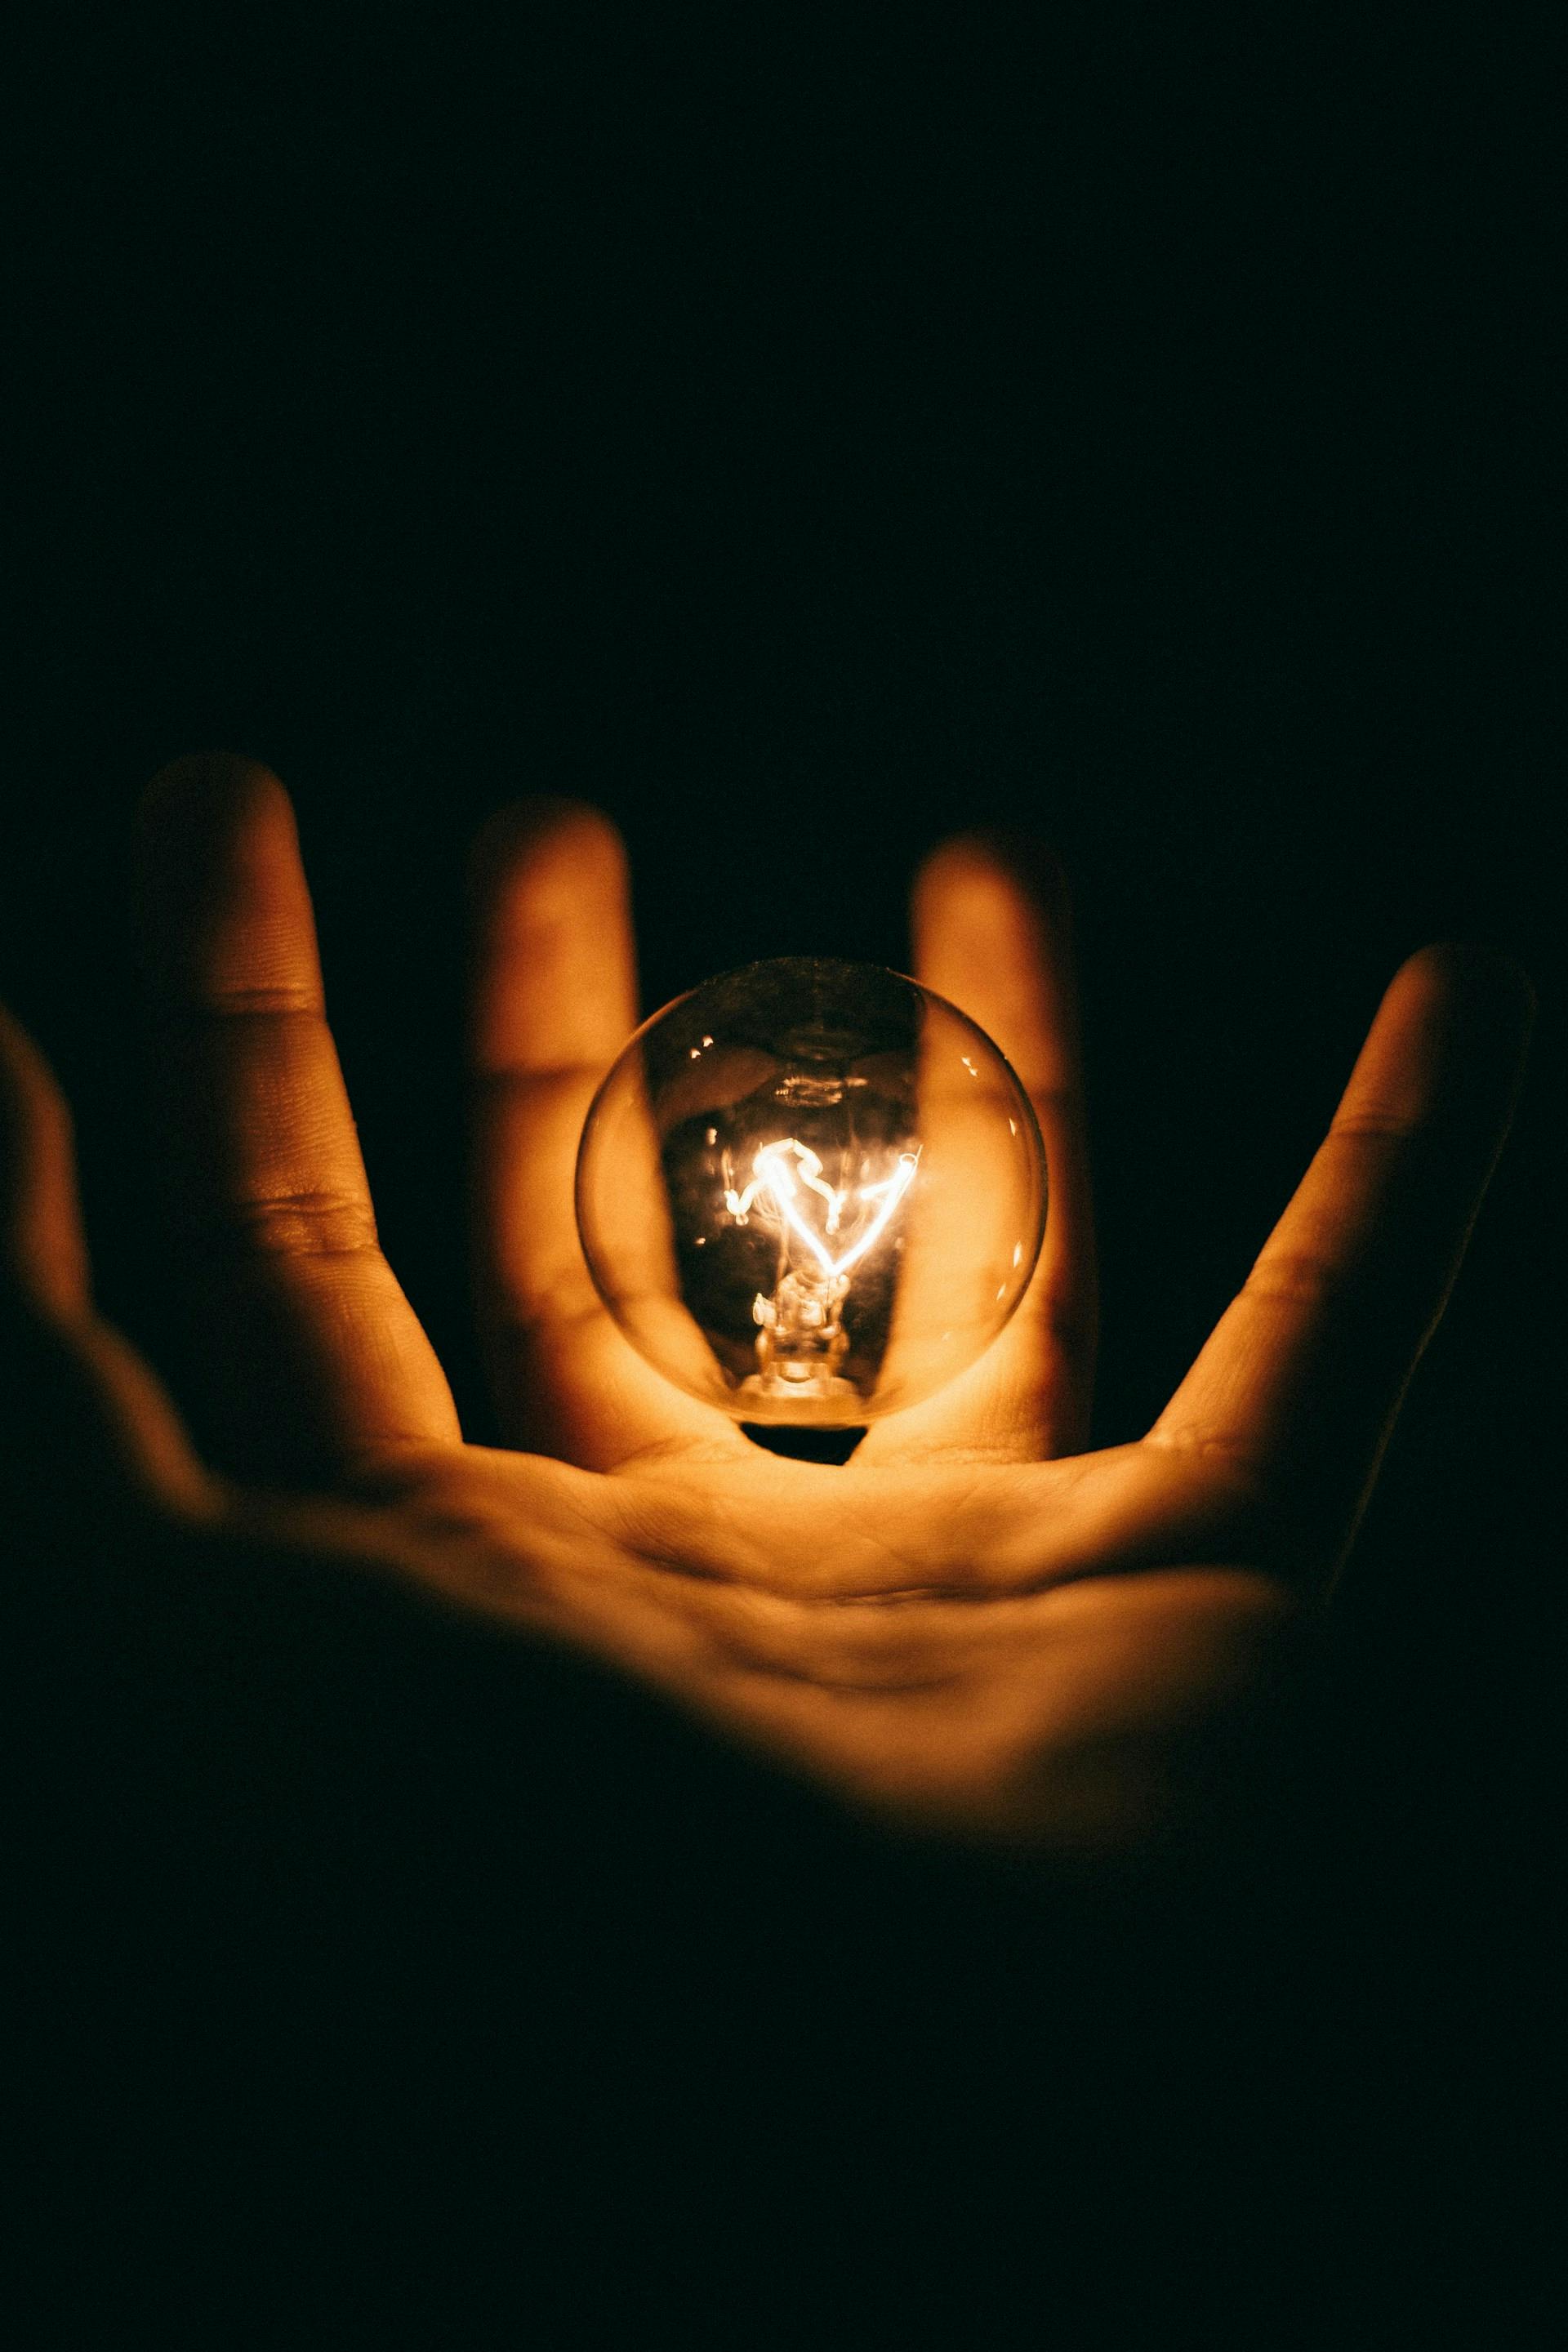 Person holding a glass bulb in their palm